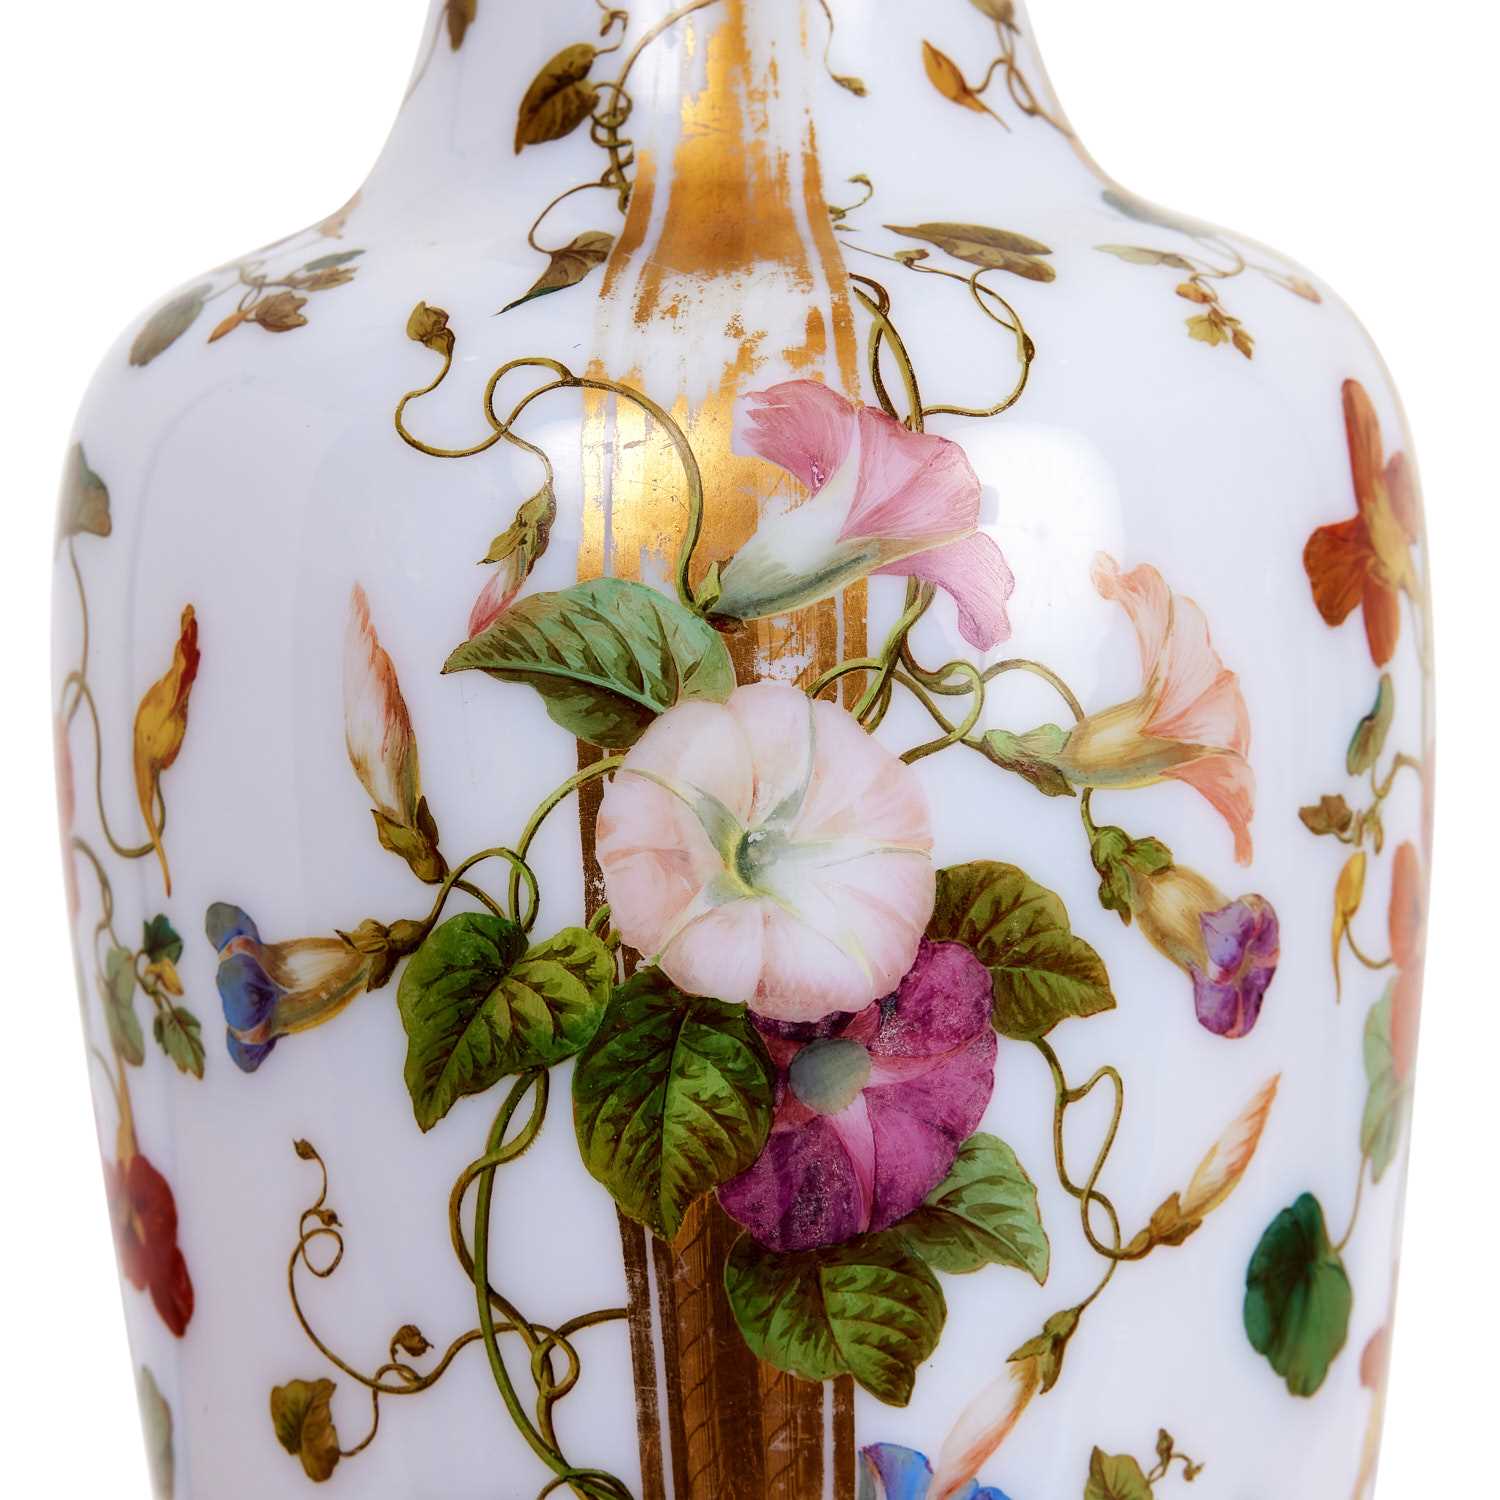 ATTRIBUTED TO BACCARAT: A MID 19TH CENTURY OPALINE GLASS VASE DECORATED WITH FLOWERS - Image 3 of 3